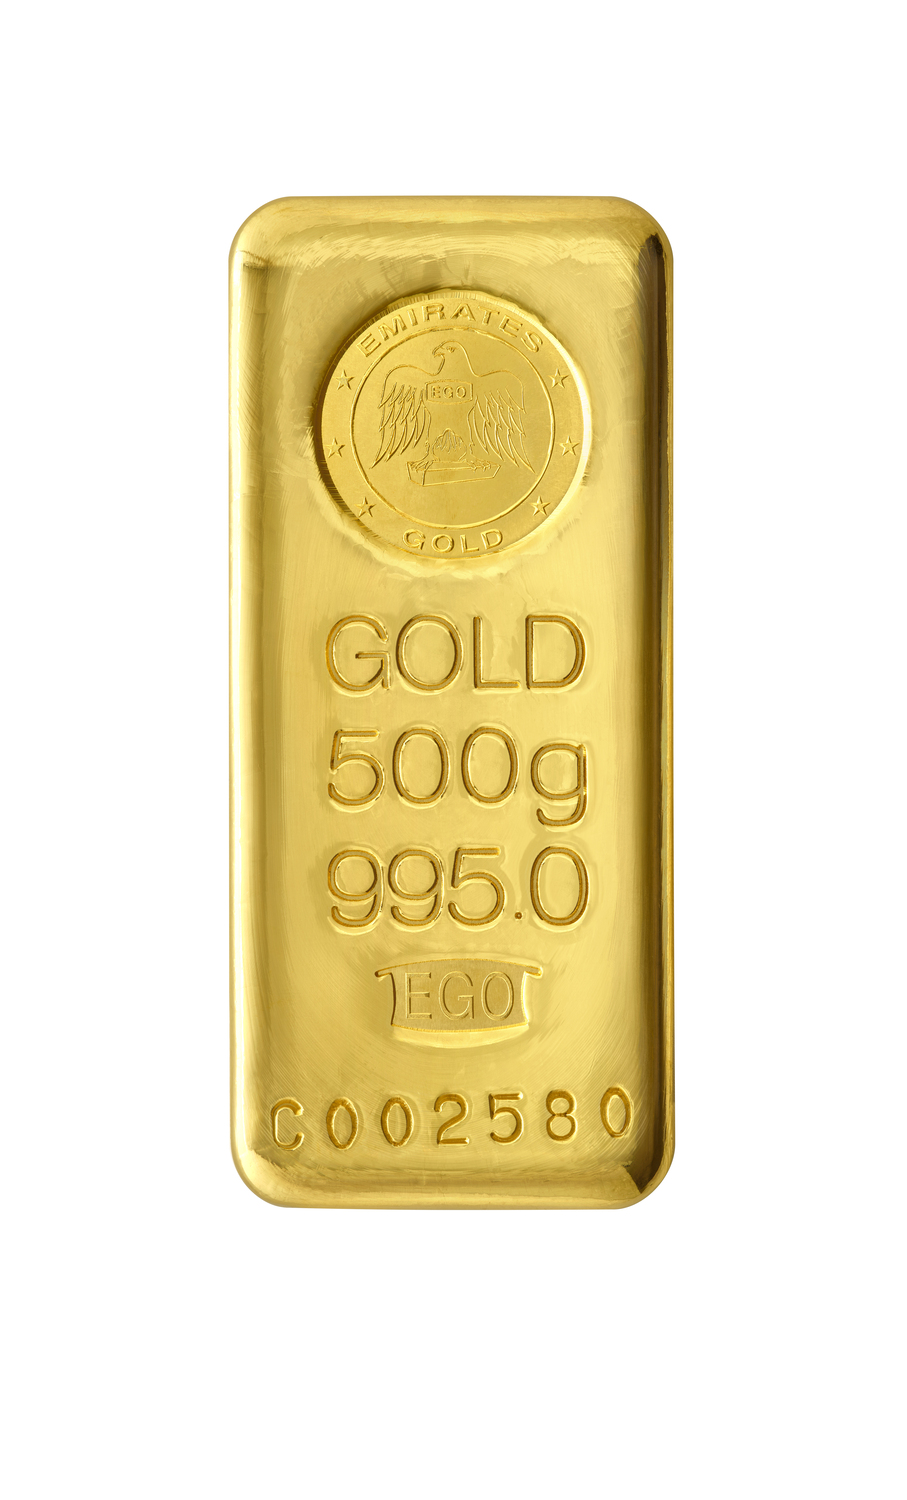 Silver Cast Bar – 1 Kg (999.0 Purity) – Emirates Gold